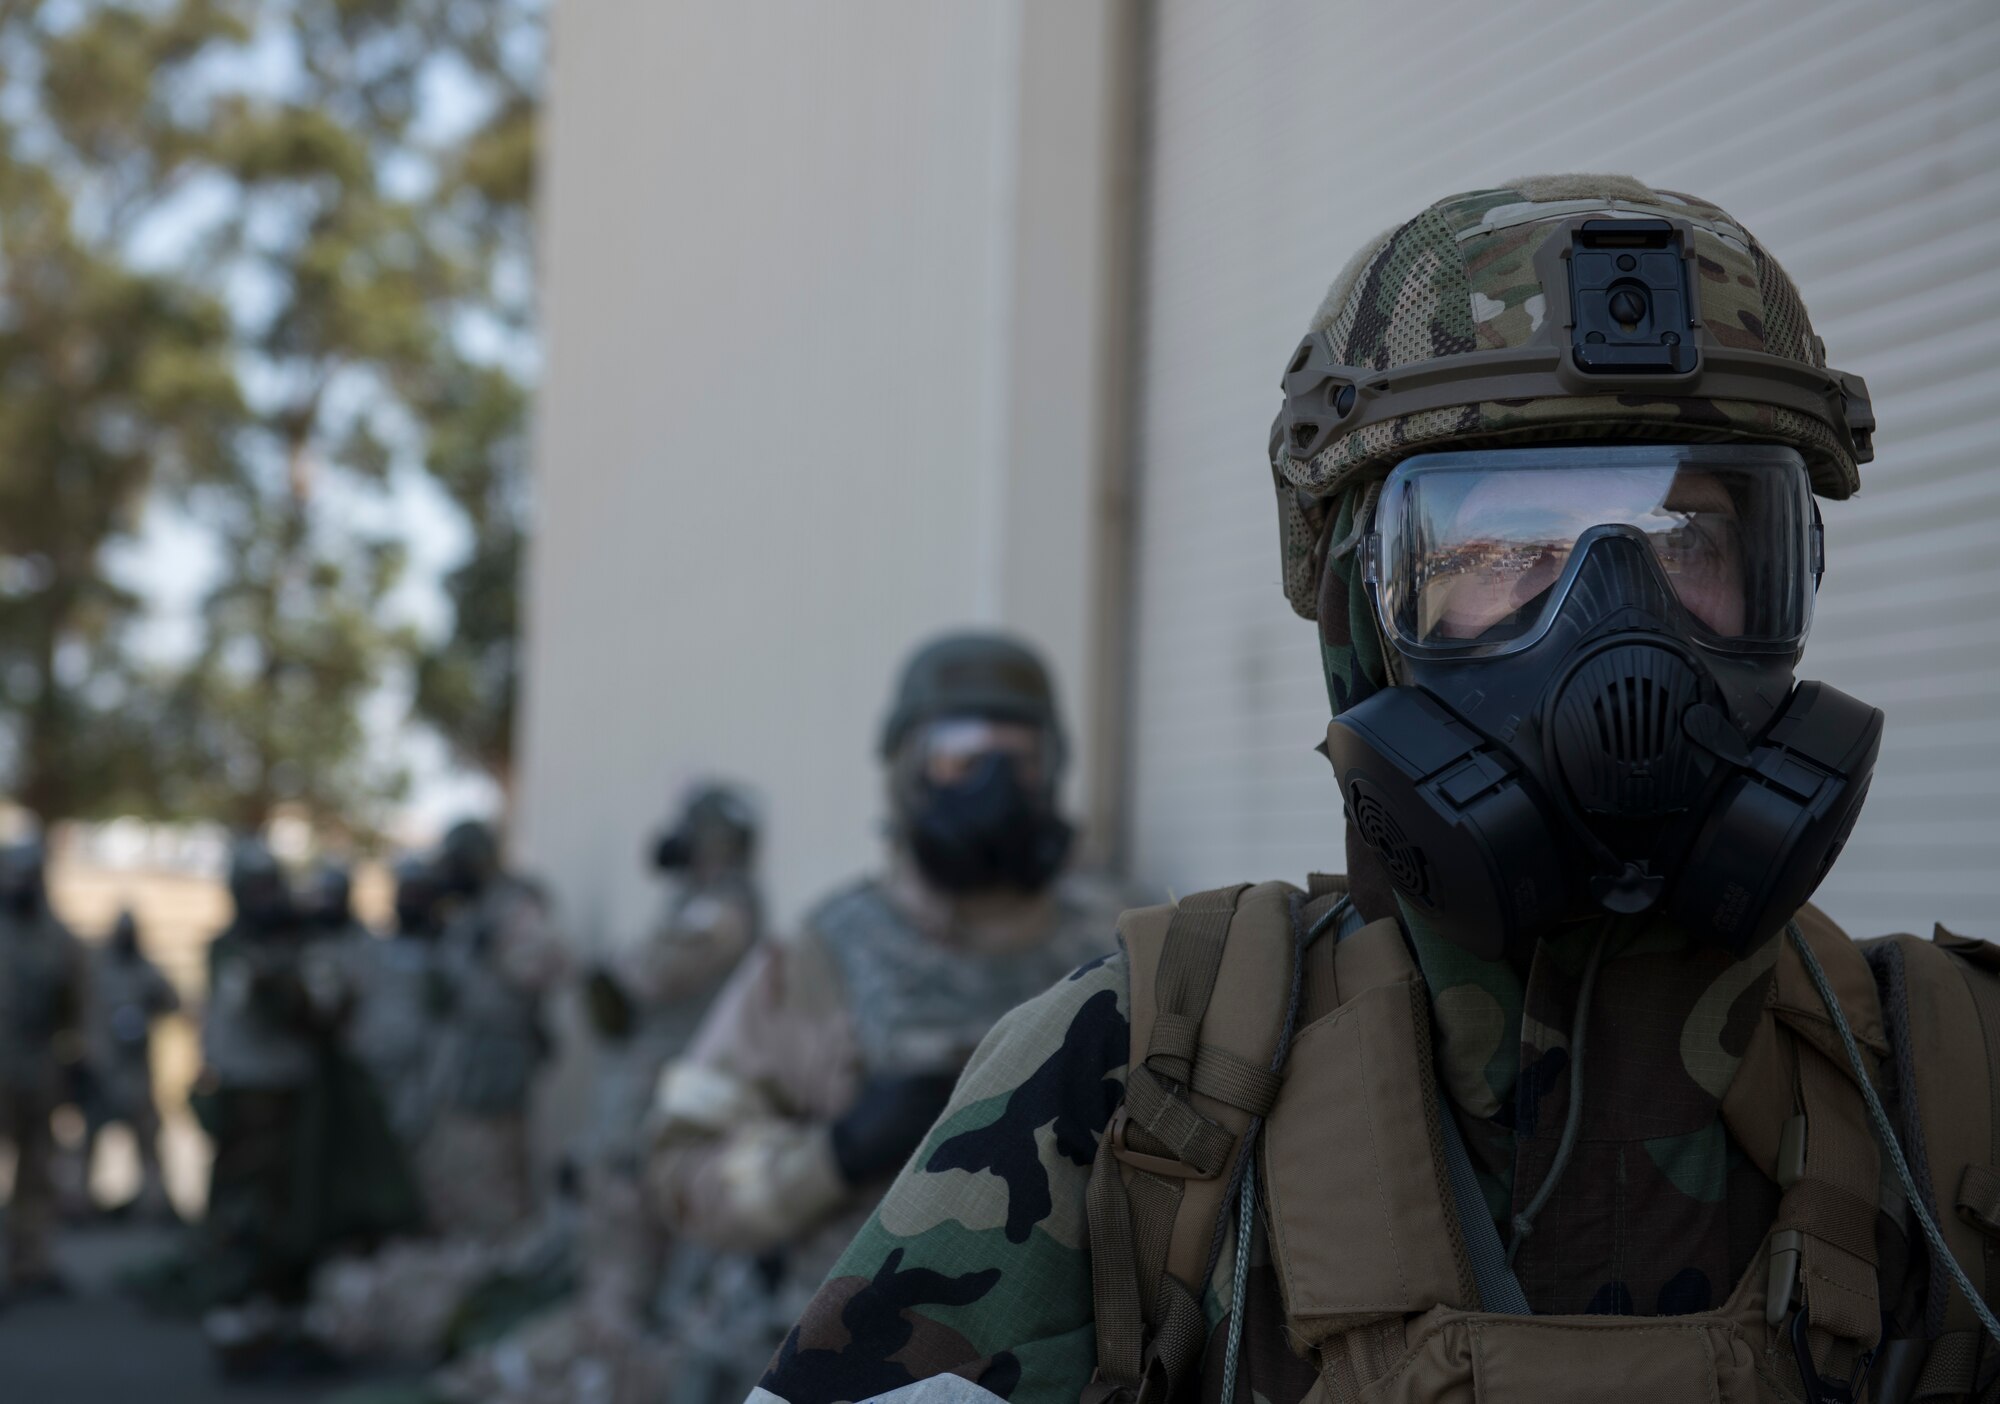 Airmen assigned to the 60th Air Mobility Wing wait to be processed through simulated decontamination during a readiness exercise at Travis Air Force Base, California, May 9, 2019. The Airmen participated in a week-long exercise that evaluated the base’s readiness and ability to execute and sustain rapid global mobility around the world. (U.S. Air Force Photo by Airman 1st Class Amy Younger)